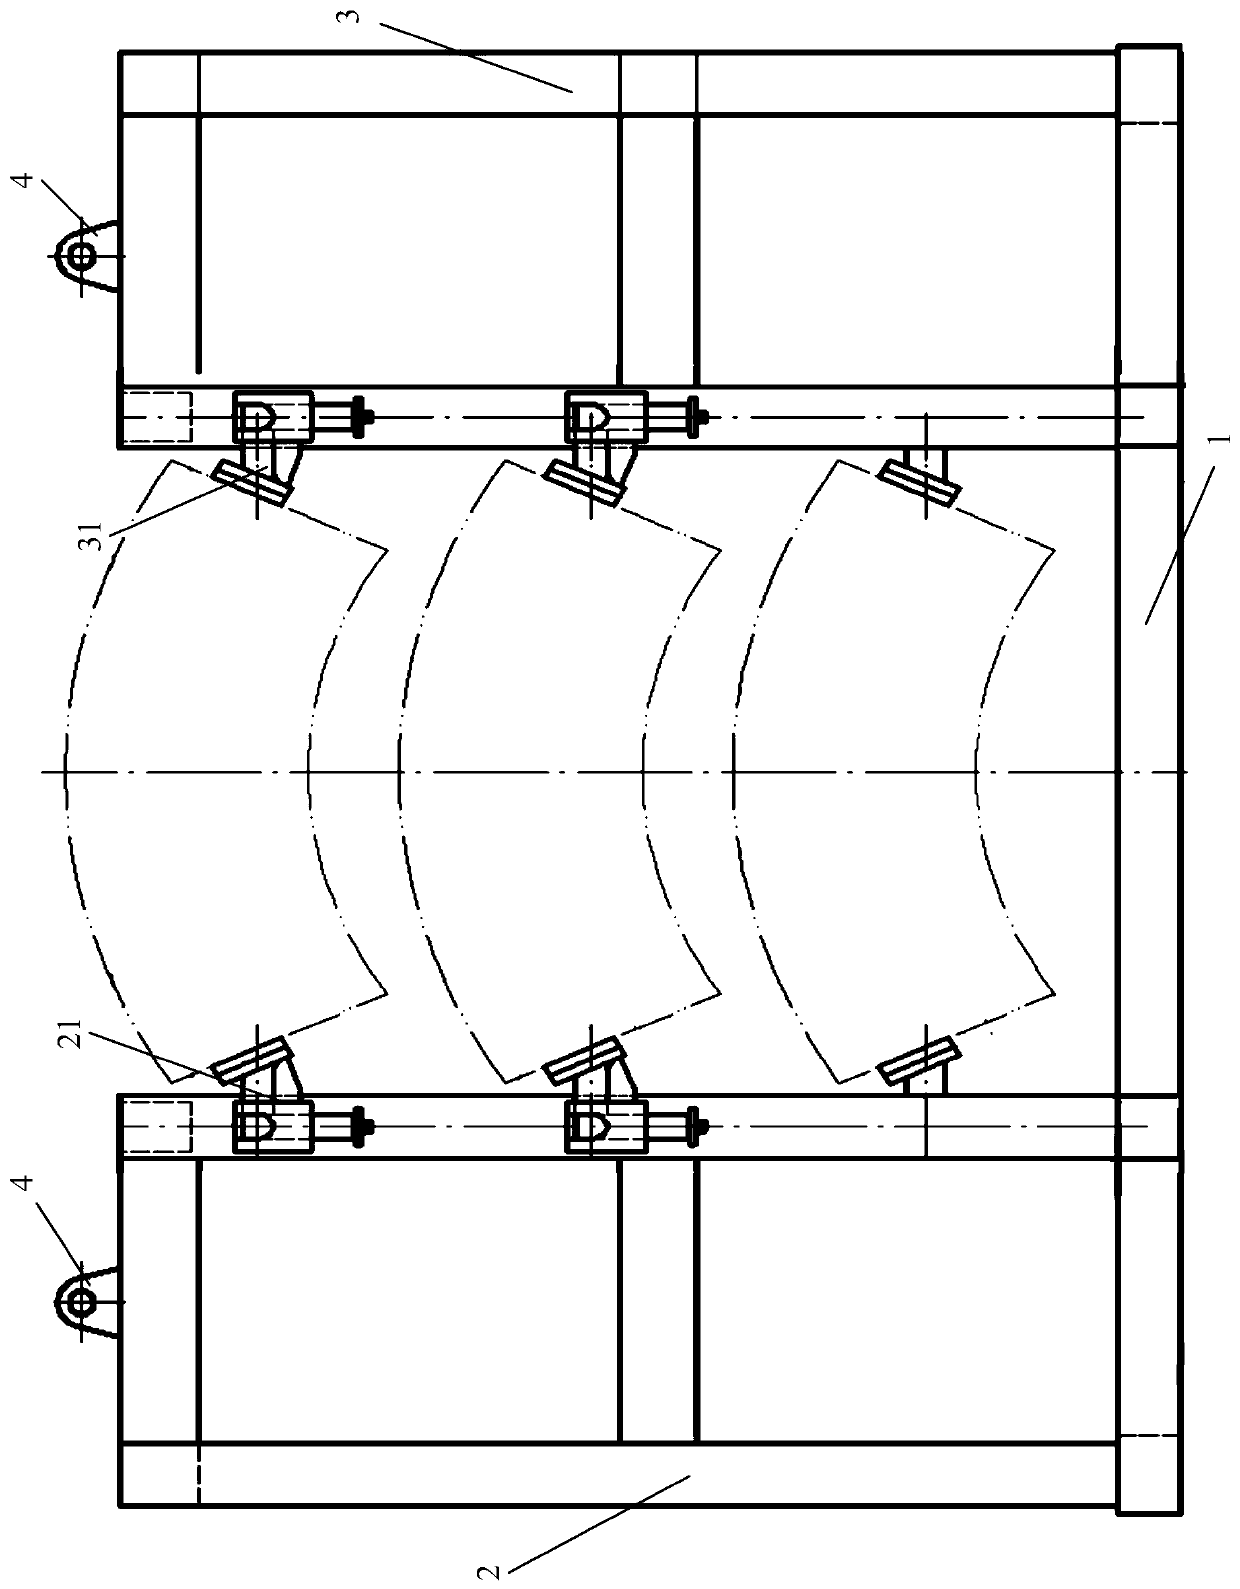 A nuclear power generator static blade seat placement bracket